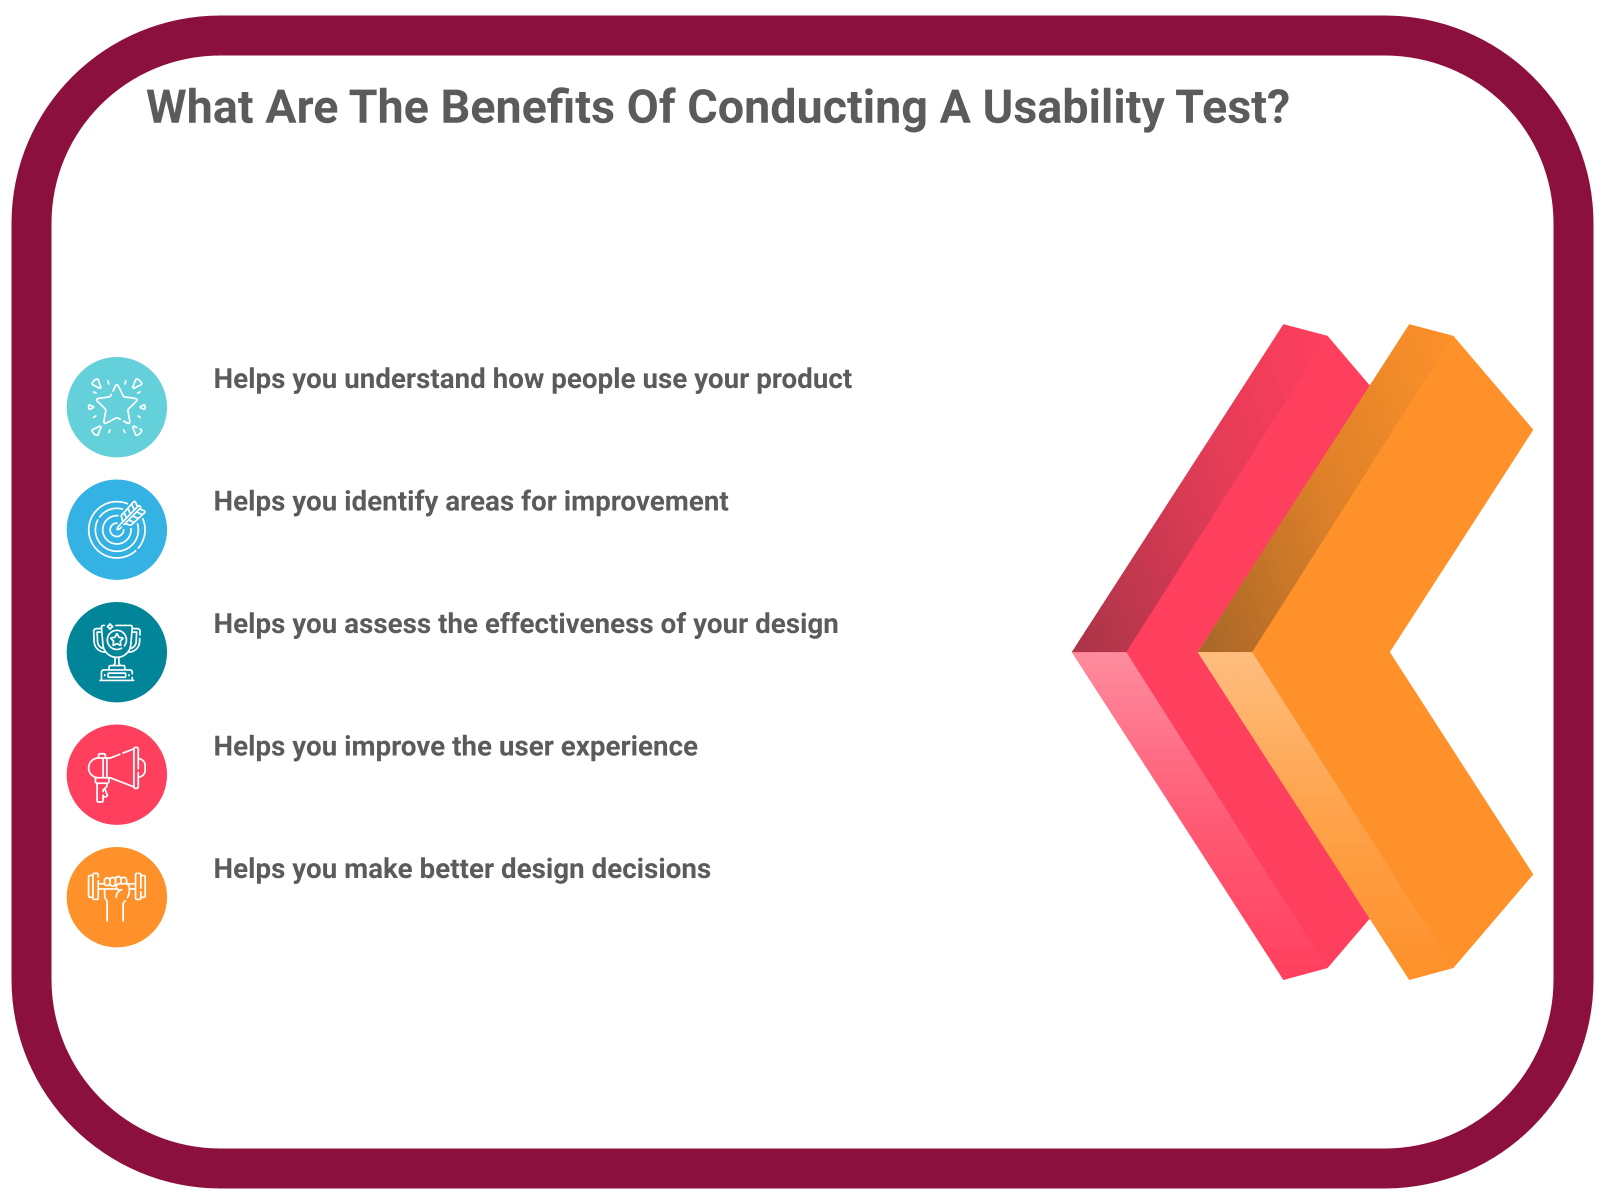 INFOGRAPHIC: What are the benefits of conducting a usability test? - Poll the People